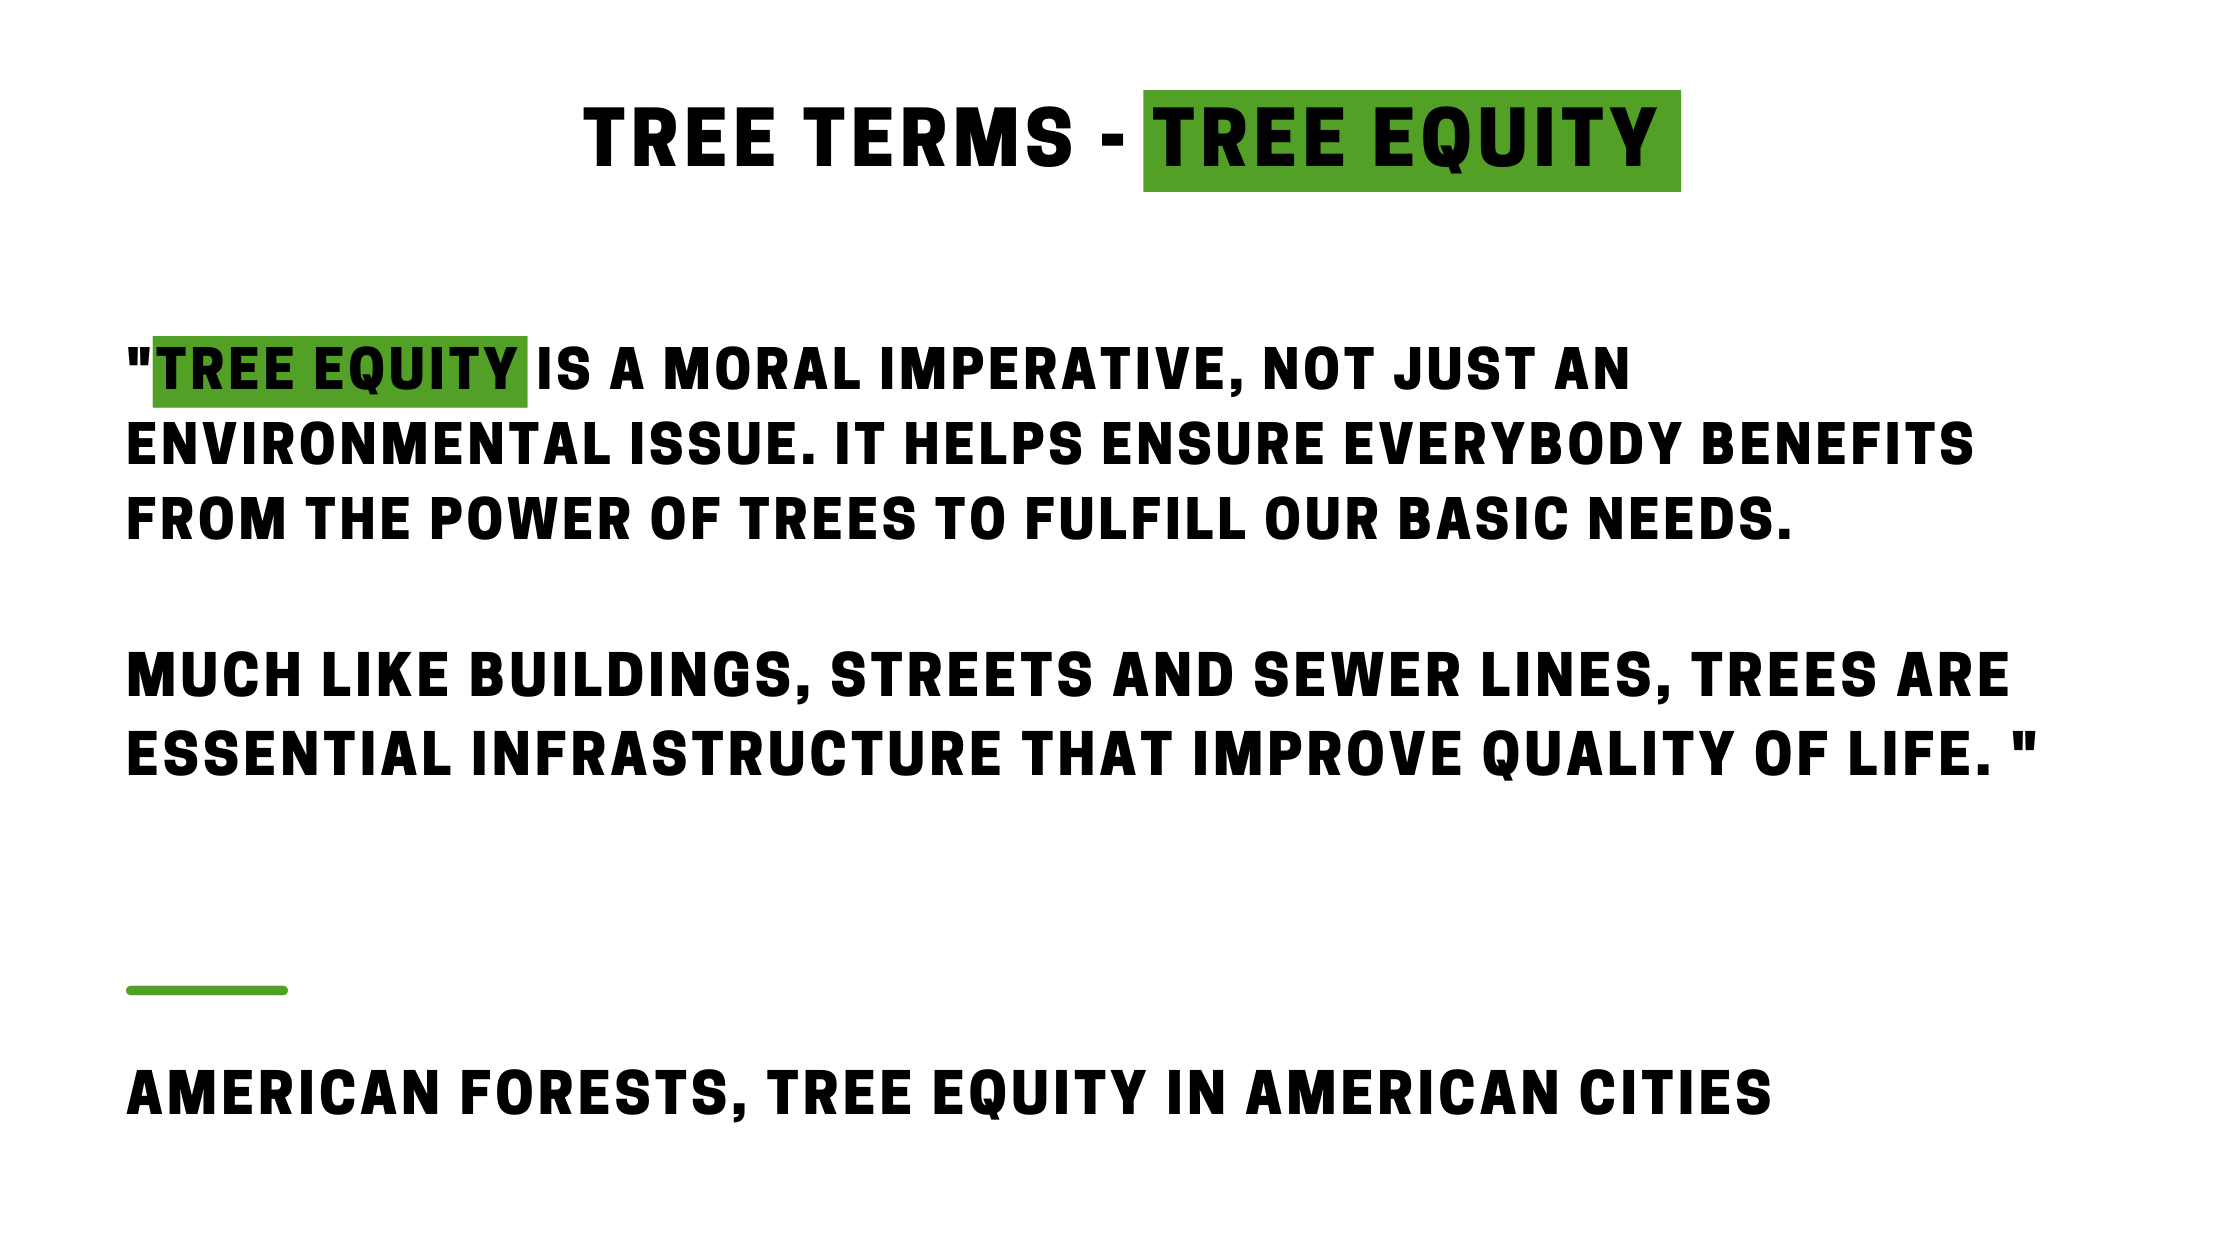 "Tree Equity is a moral imperative, not just an environmental issue. It helps ensure everybody benefits from the power of trees to fulfill our basic needs. Much like buildings, streets and sewer lines, trees are essential infrastructure that improve quality of life. " AMERICAN FORESTS, TREE EQUITY IN AMERICAN CIties